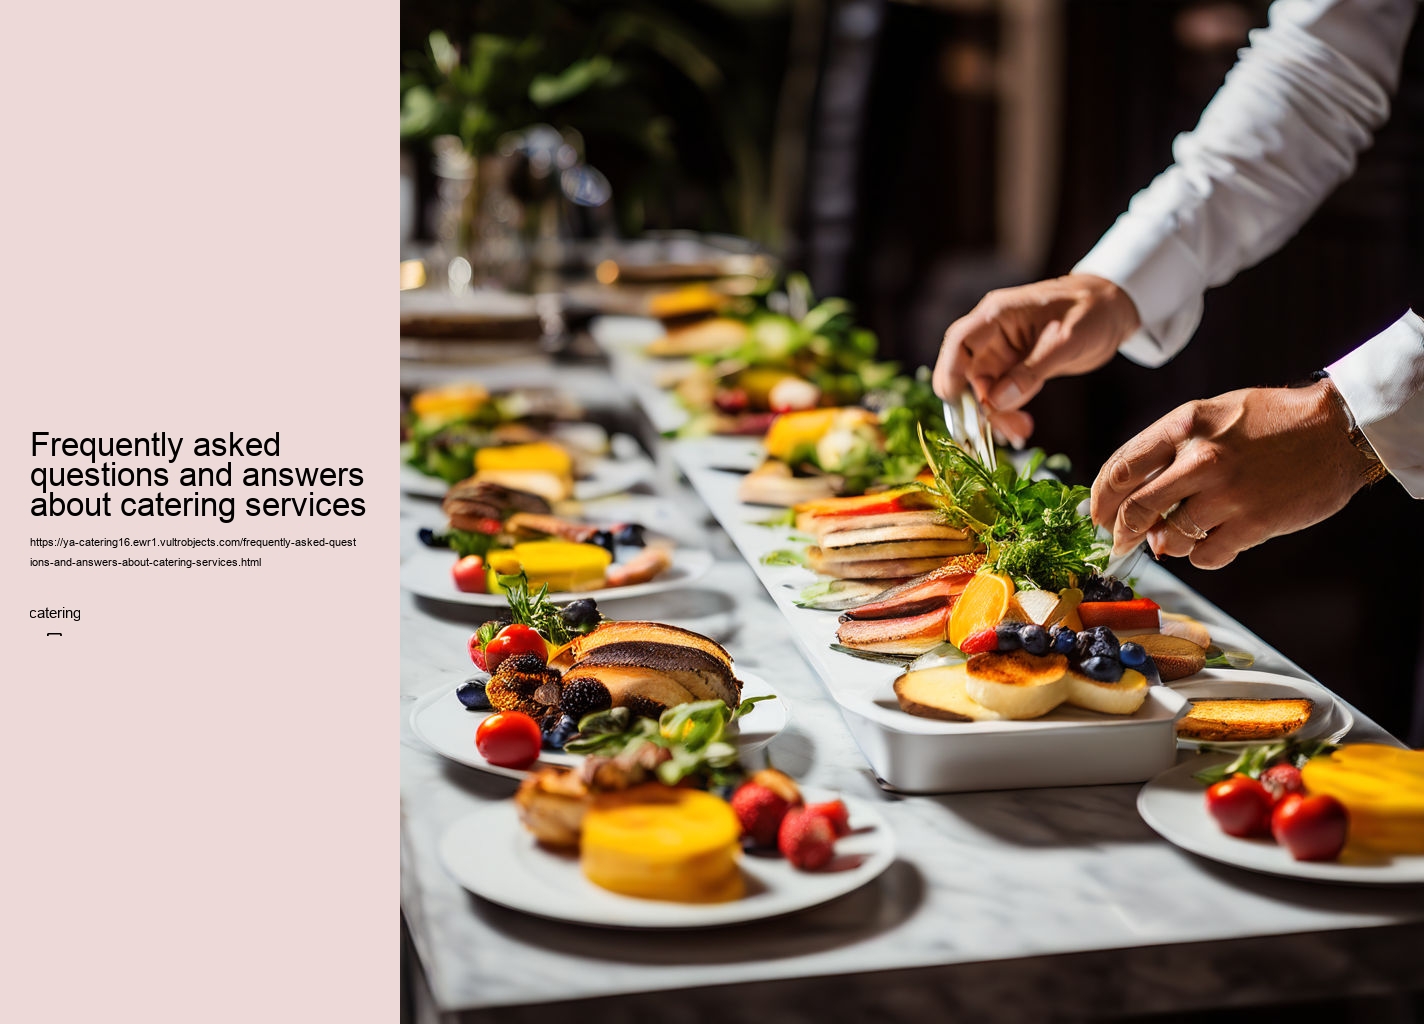 Frequently asked questions and answers about catering services